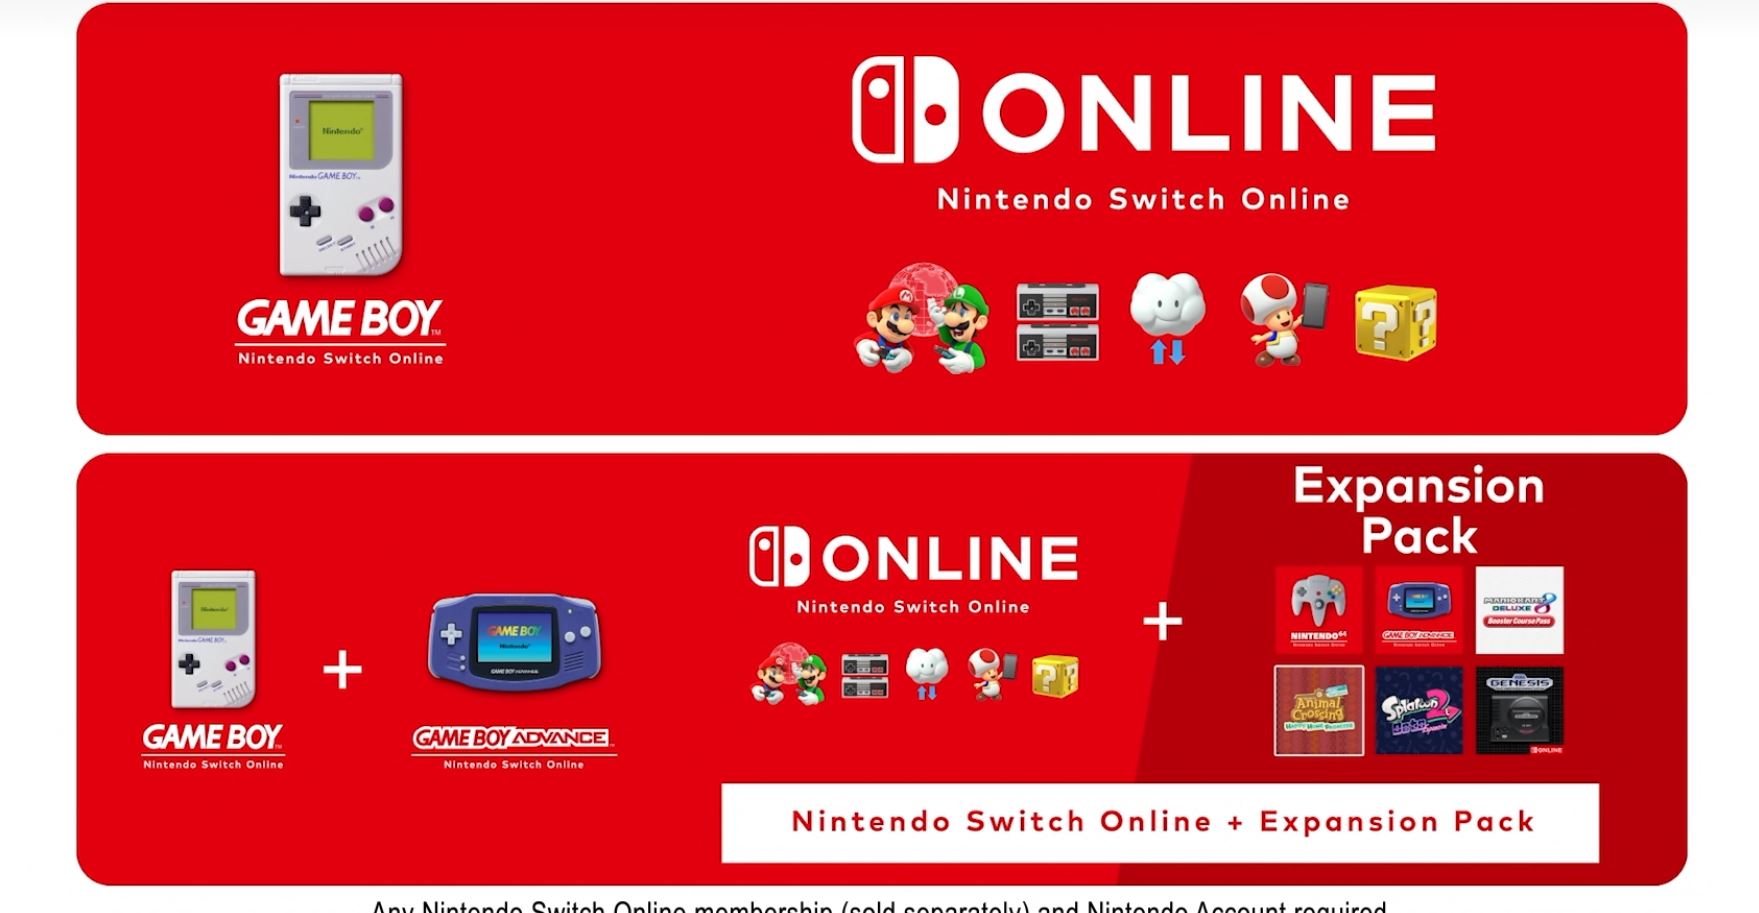 Cheap Gamer on Twitter: "News: Boy Coming to Nintendo Switch Online Today. GBA Coming to Nintendo Switch Online Expansion Pass Today. https://t.co/MzYDLp6c9Q" /